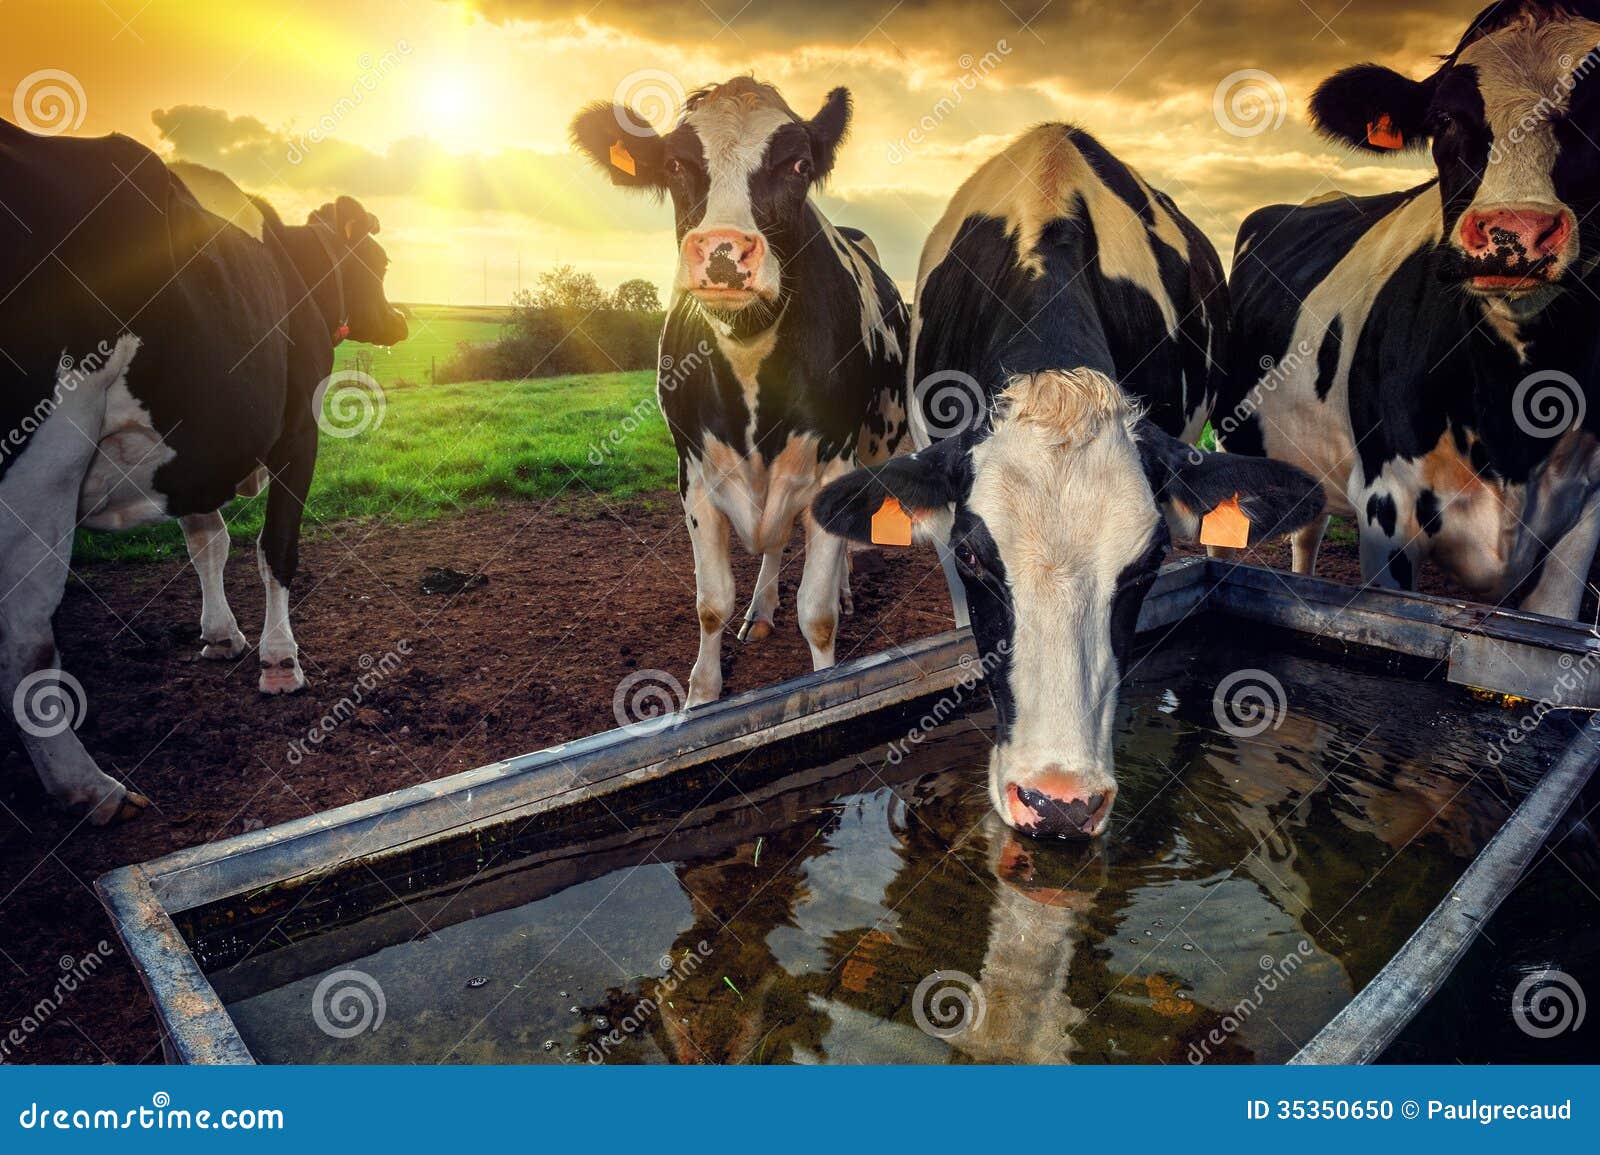 herd of young calves drinking water